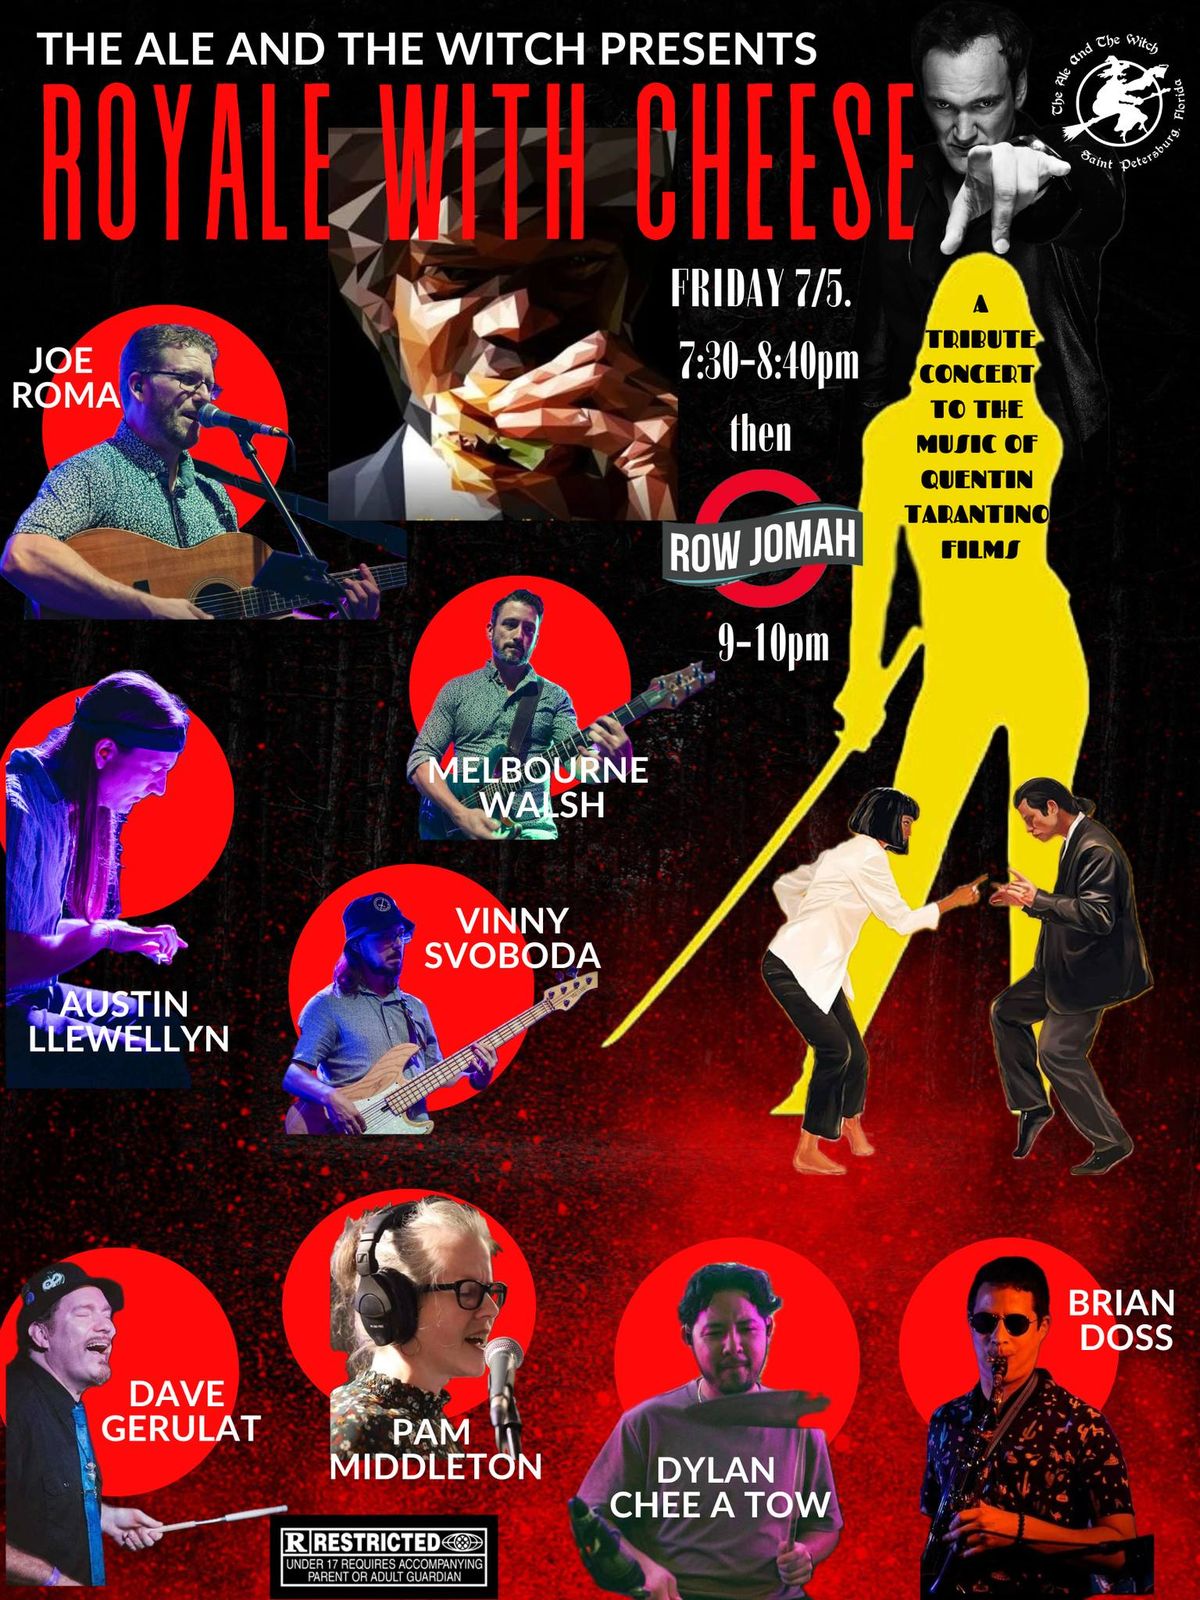 Row Jomah's special Royale with Cheese tribute concert set I and set II Original music FR 7\/5 7:30pm